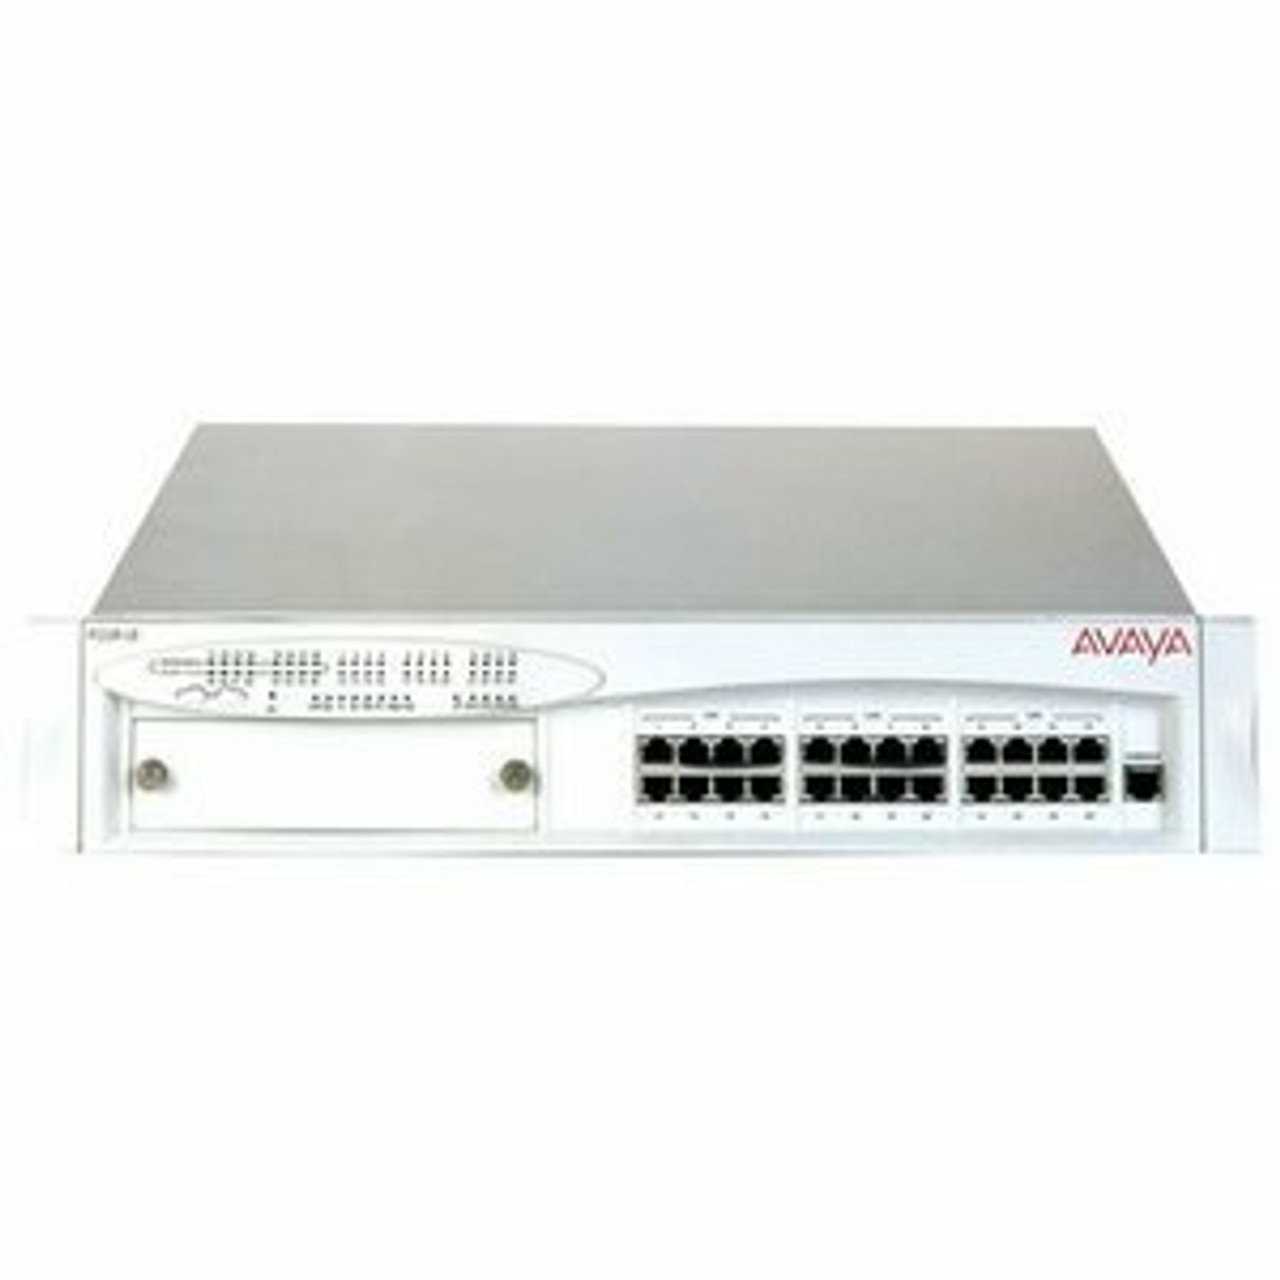 108715244 Avaya P333R Stackable Layer 3 Switch - 1 x Expansion Slot, 1 x Stacking Module - 24 x  (Refurbished)